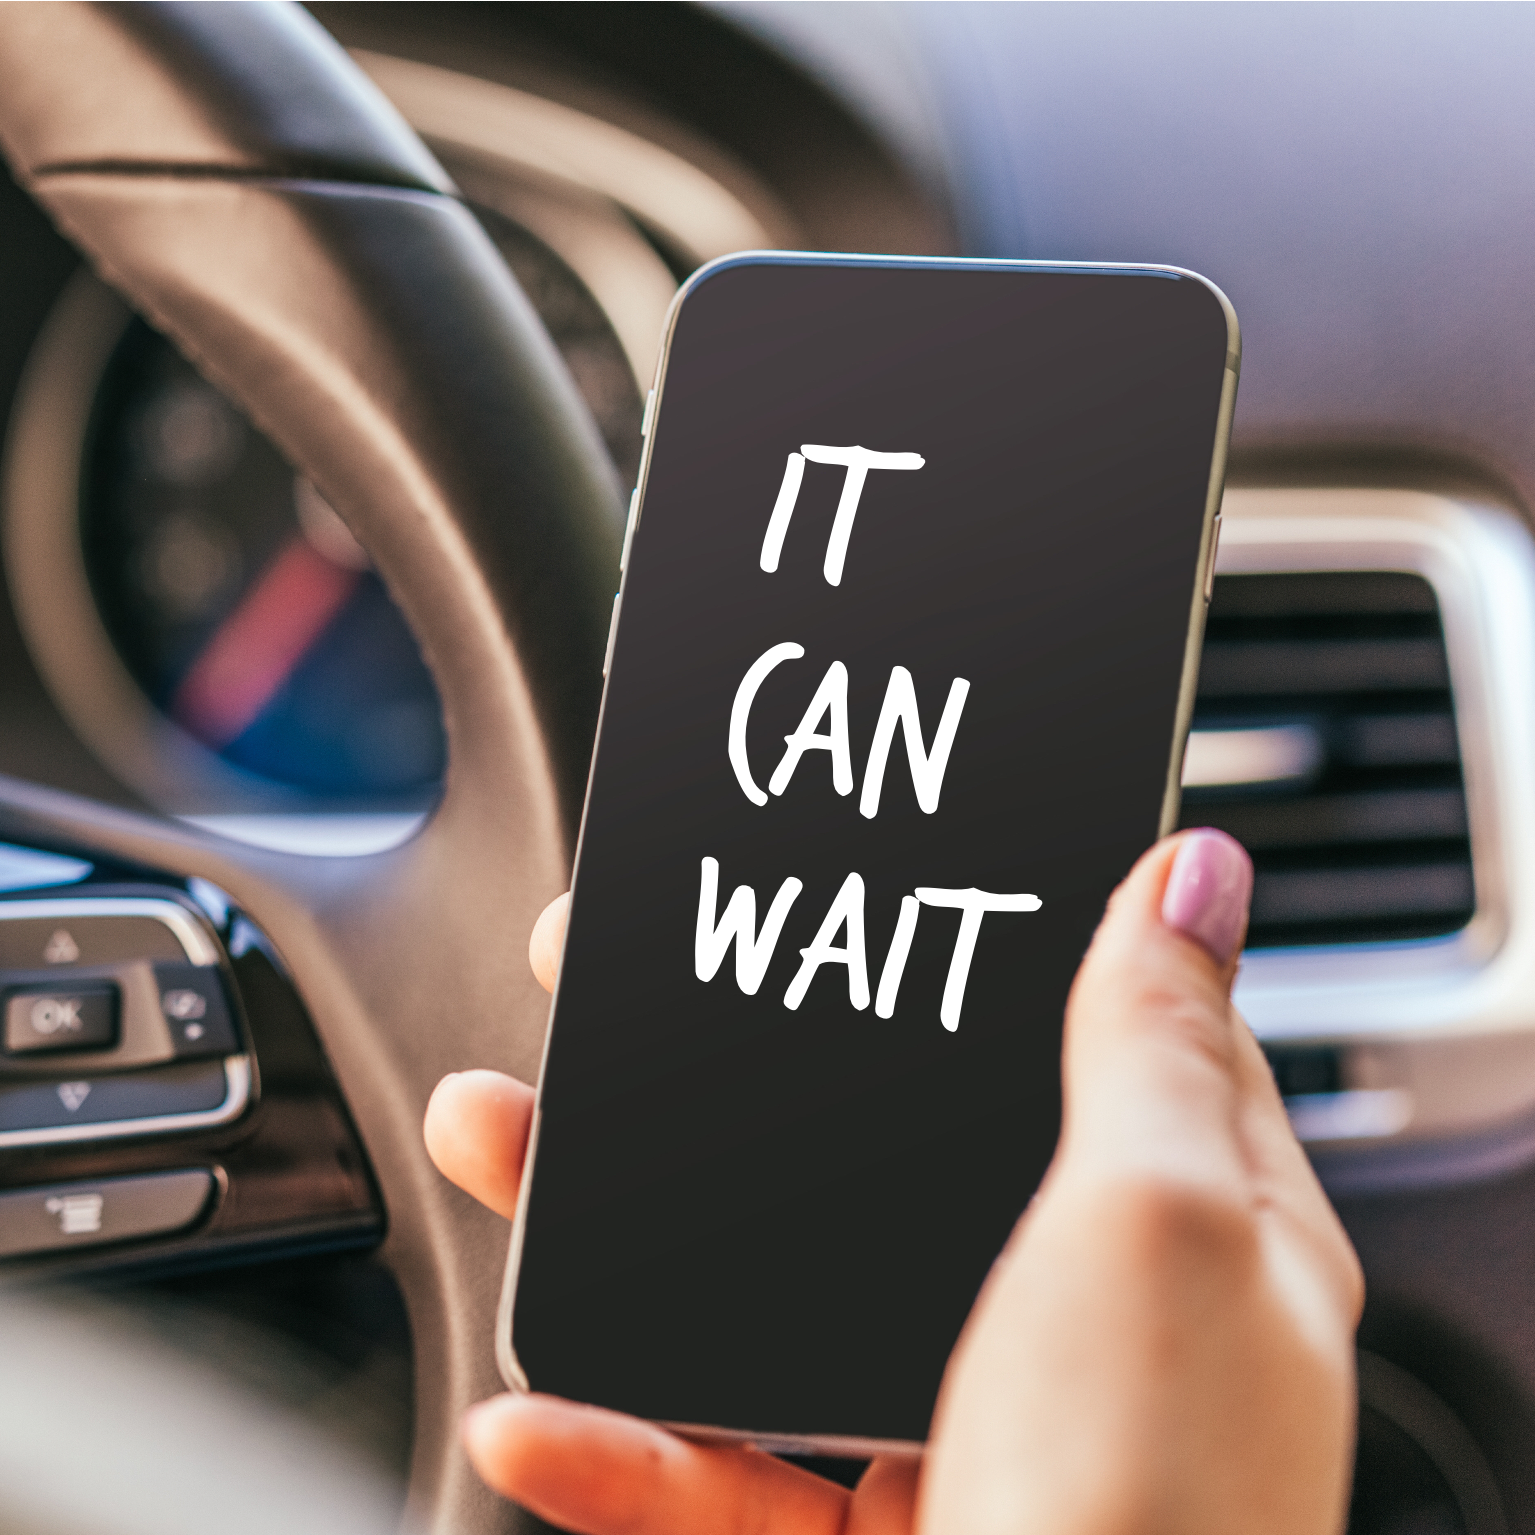 Tips to End Distracted Driving